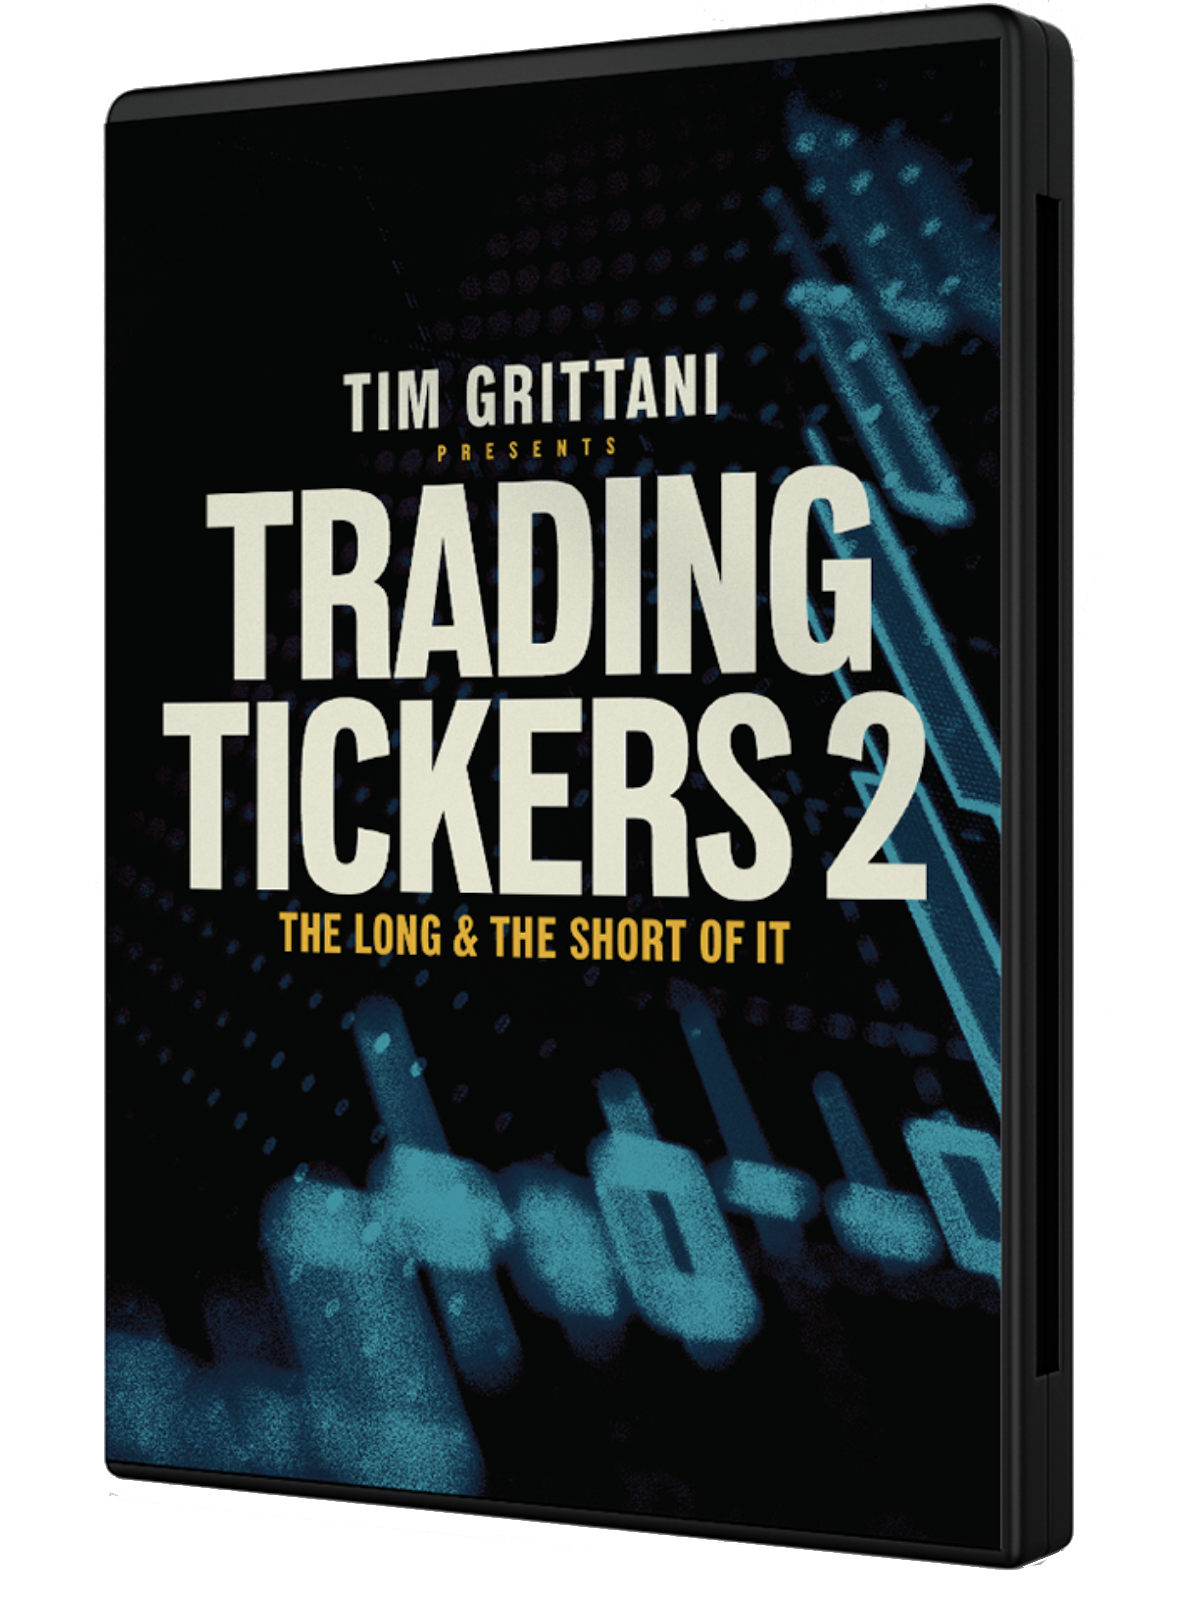 Trading Tickers 2 by Tim Grittani 